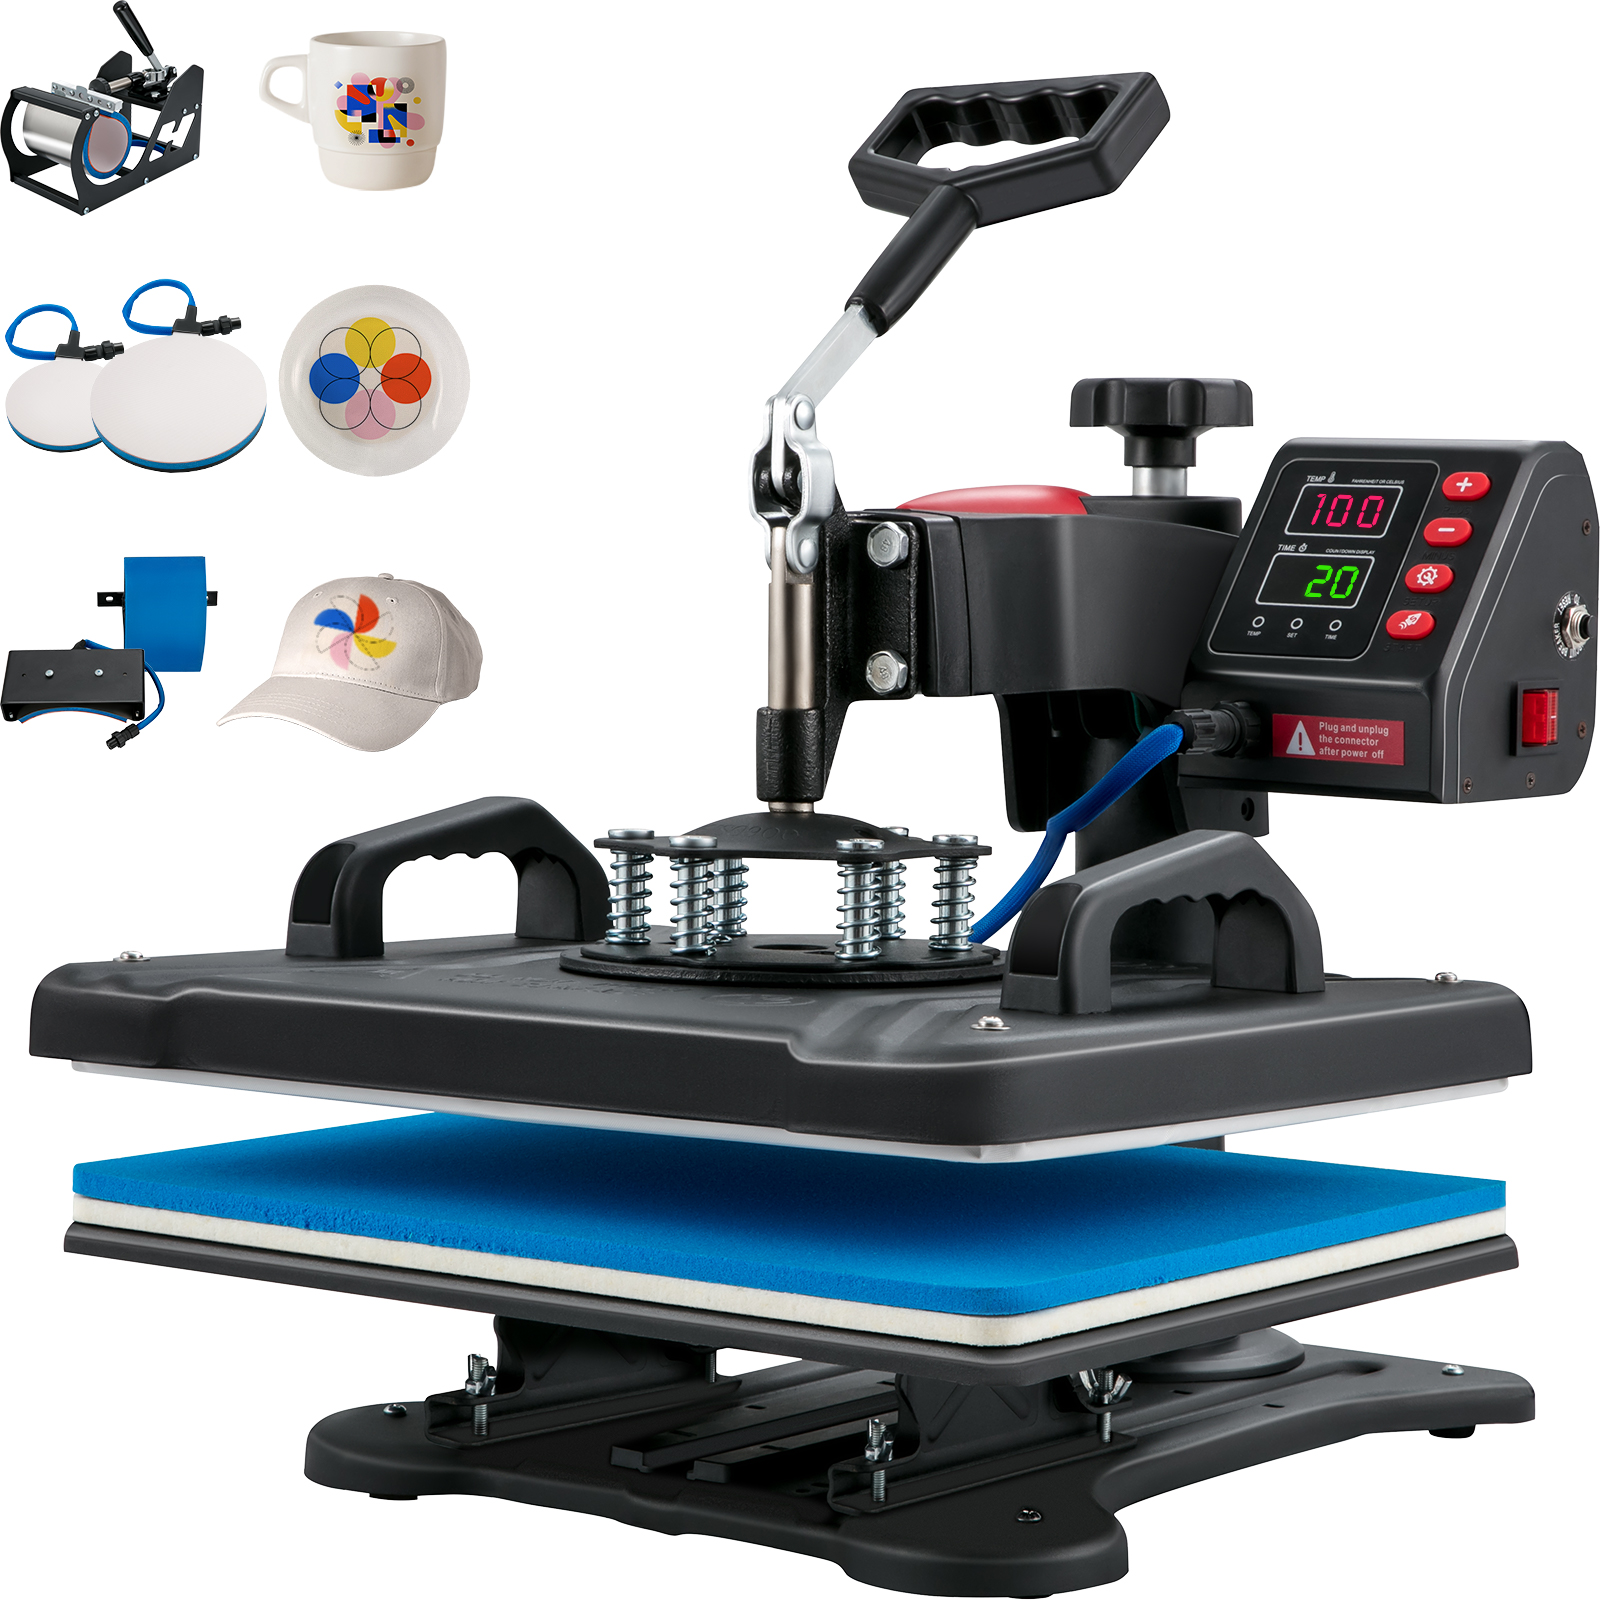 BENTISM Heat Press Machine 5 in 1, 12x15 Clamshell Sublimation